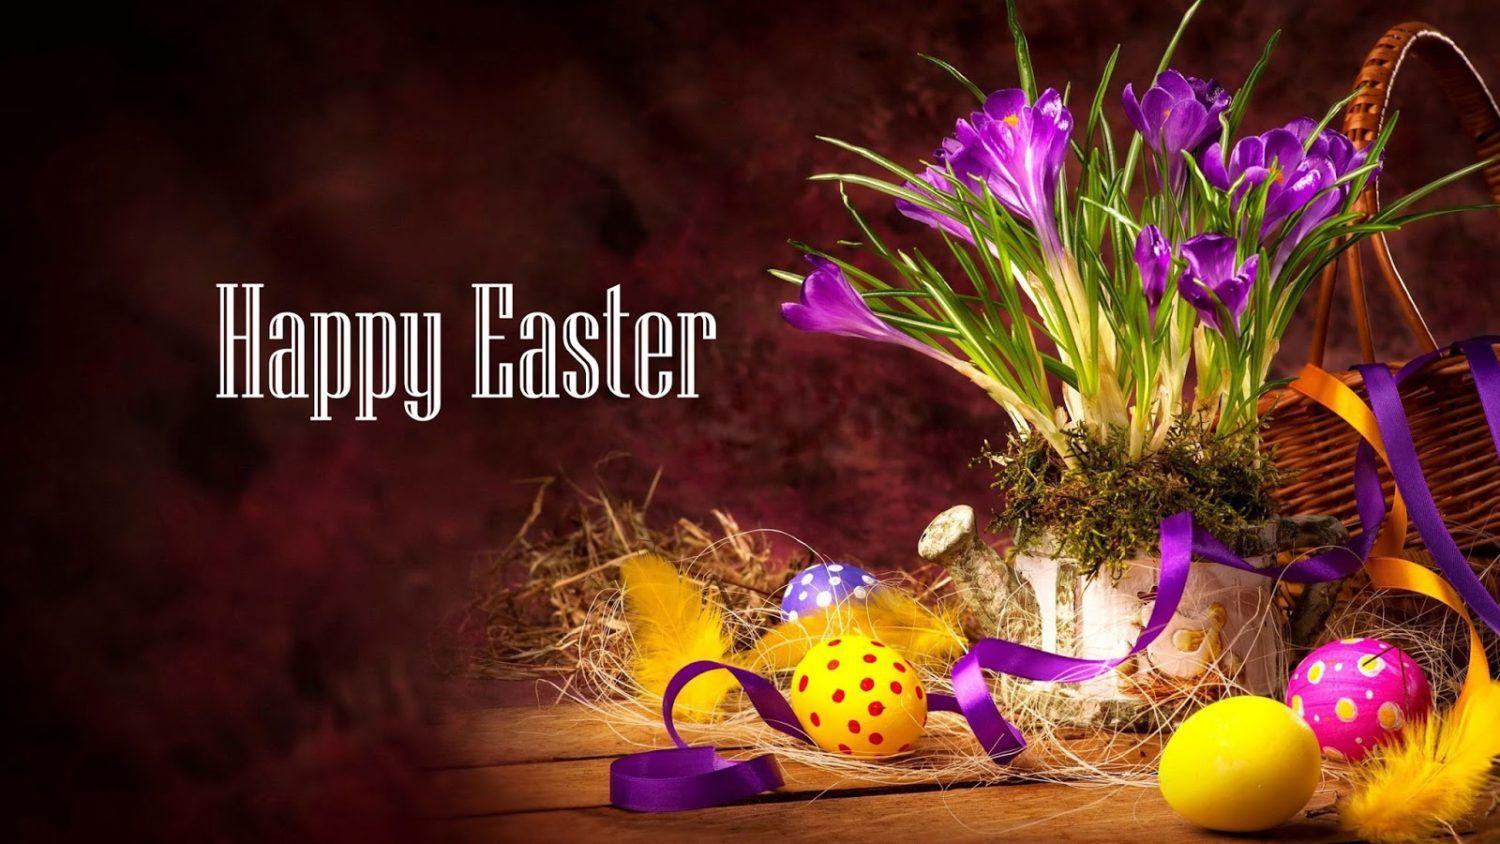 Happy Easter Sunday Wallpaper HD Free for Desk